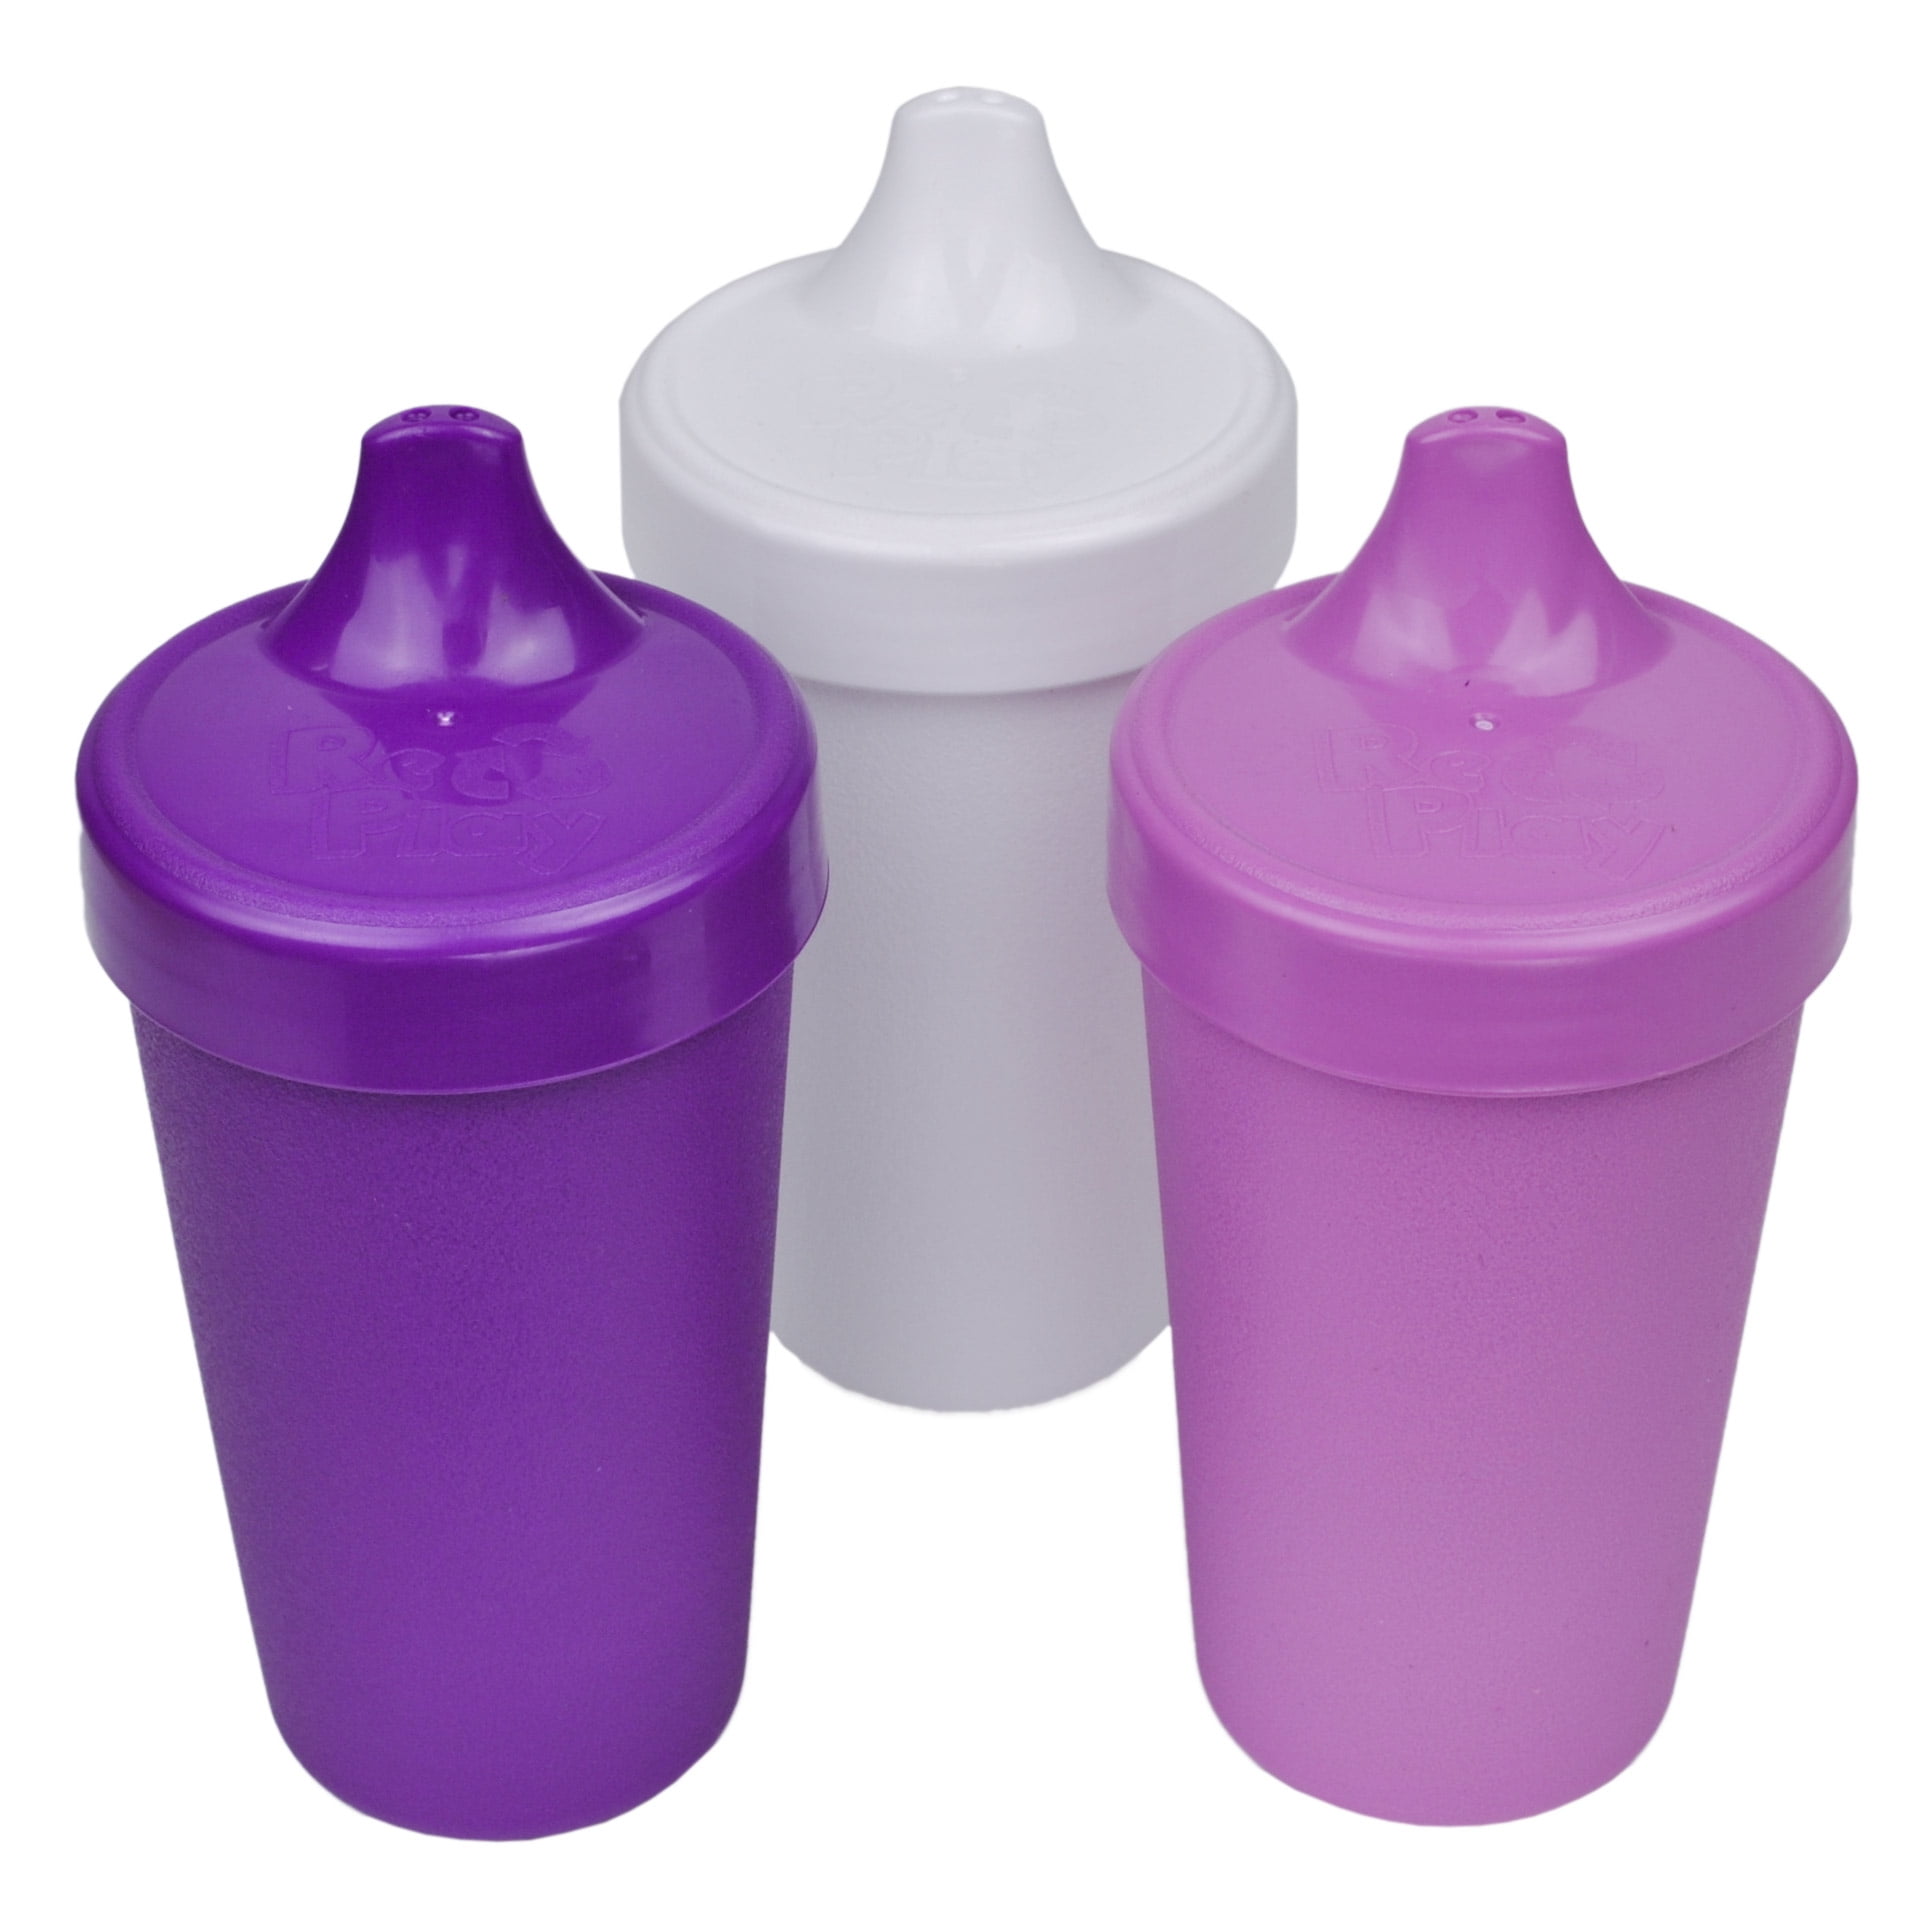 Re-Play Baby Sippy Cups for Toddlers 2pk Kids No Spill Cup Amethyst Purple, Size: 3 x 5 x 3